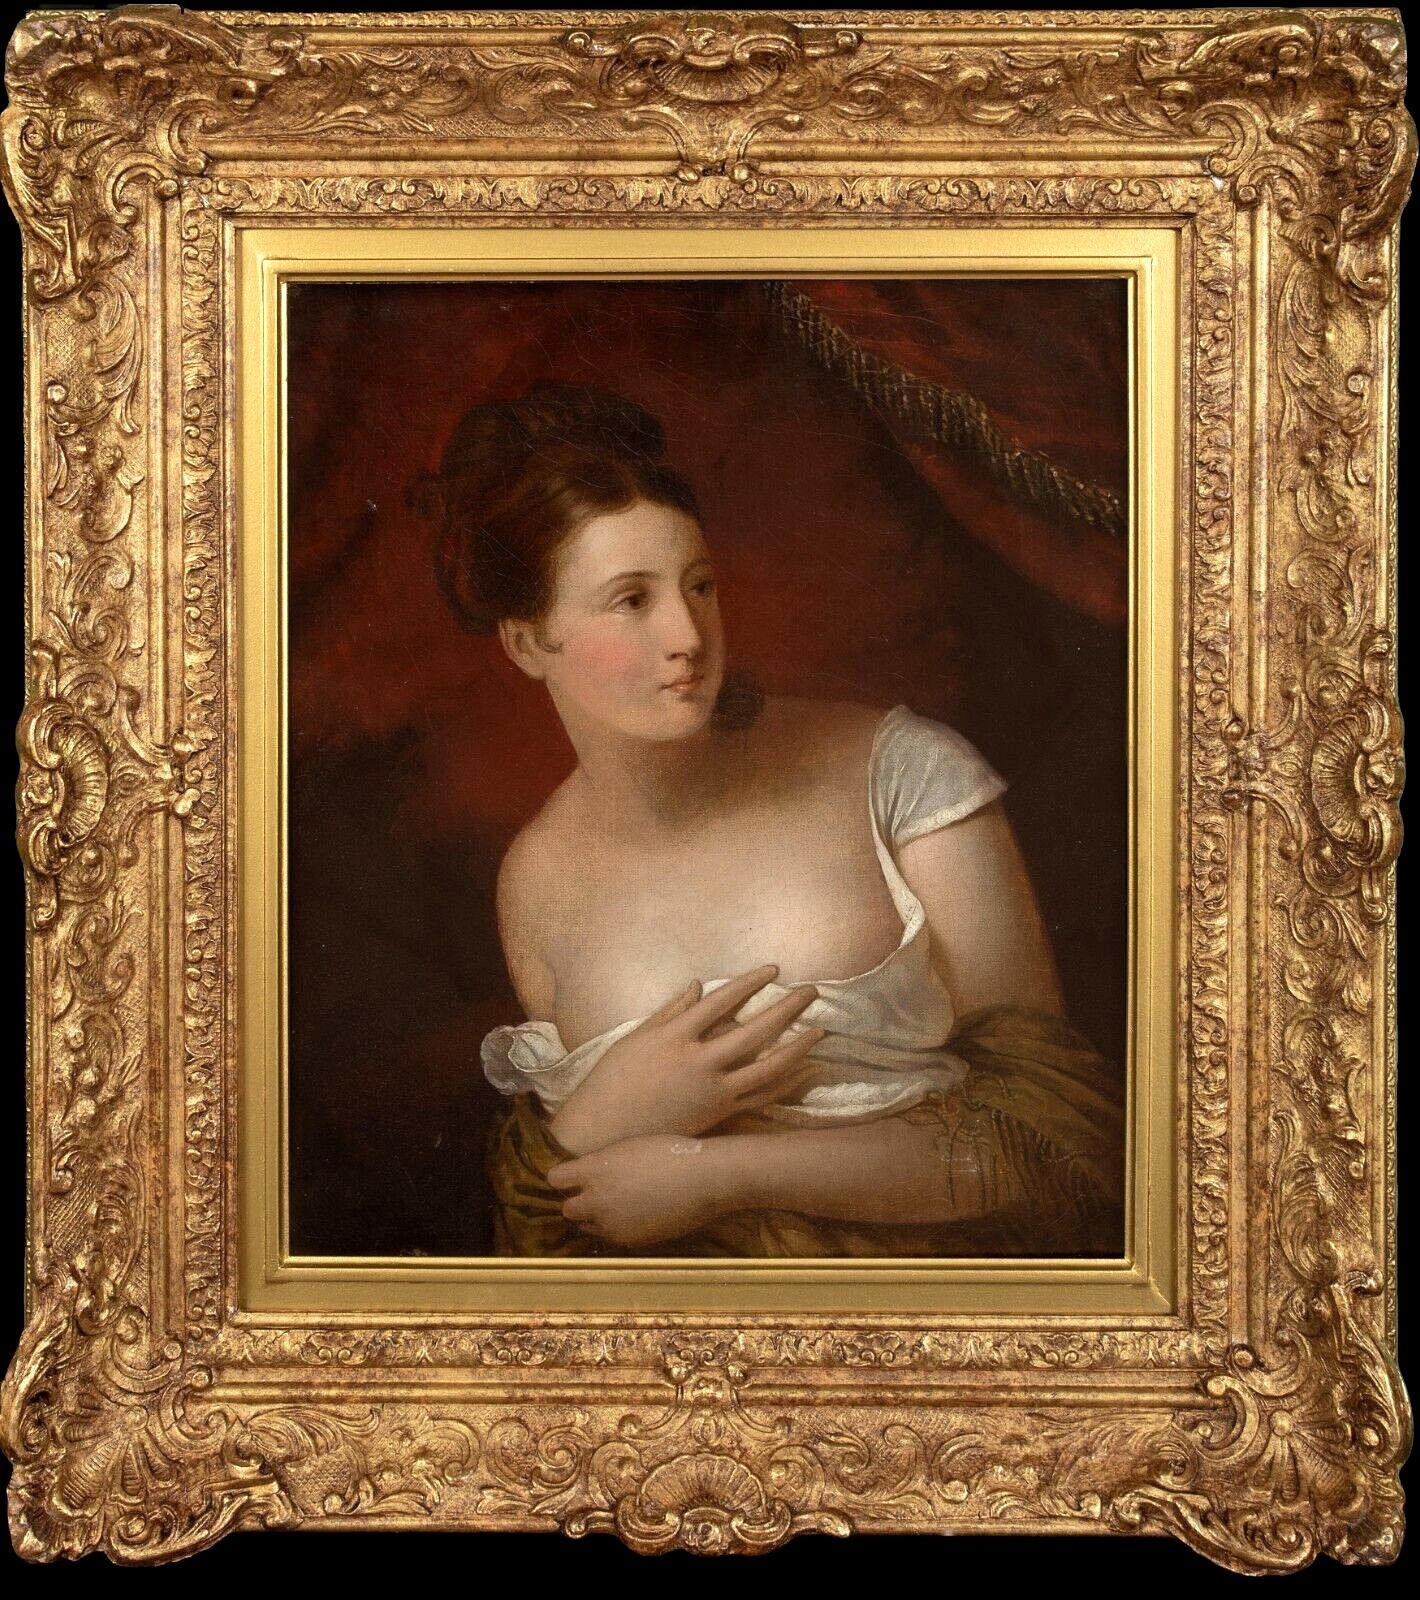 PORTRAIT OF A DISROBED WOMAN OIL PAINTING by French School, 19th Century, 19th century